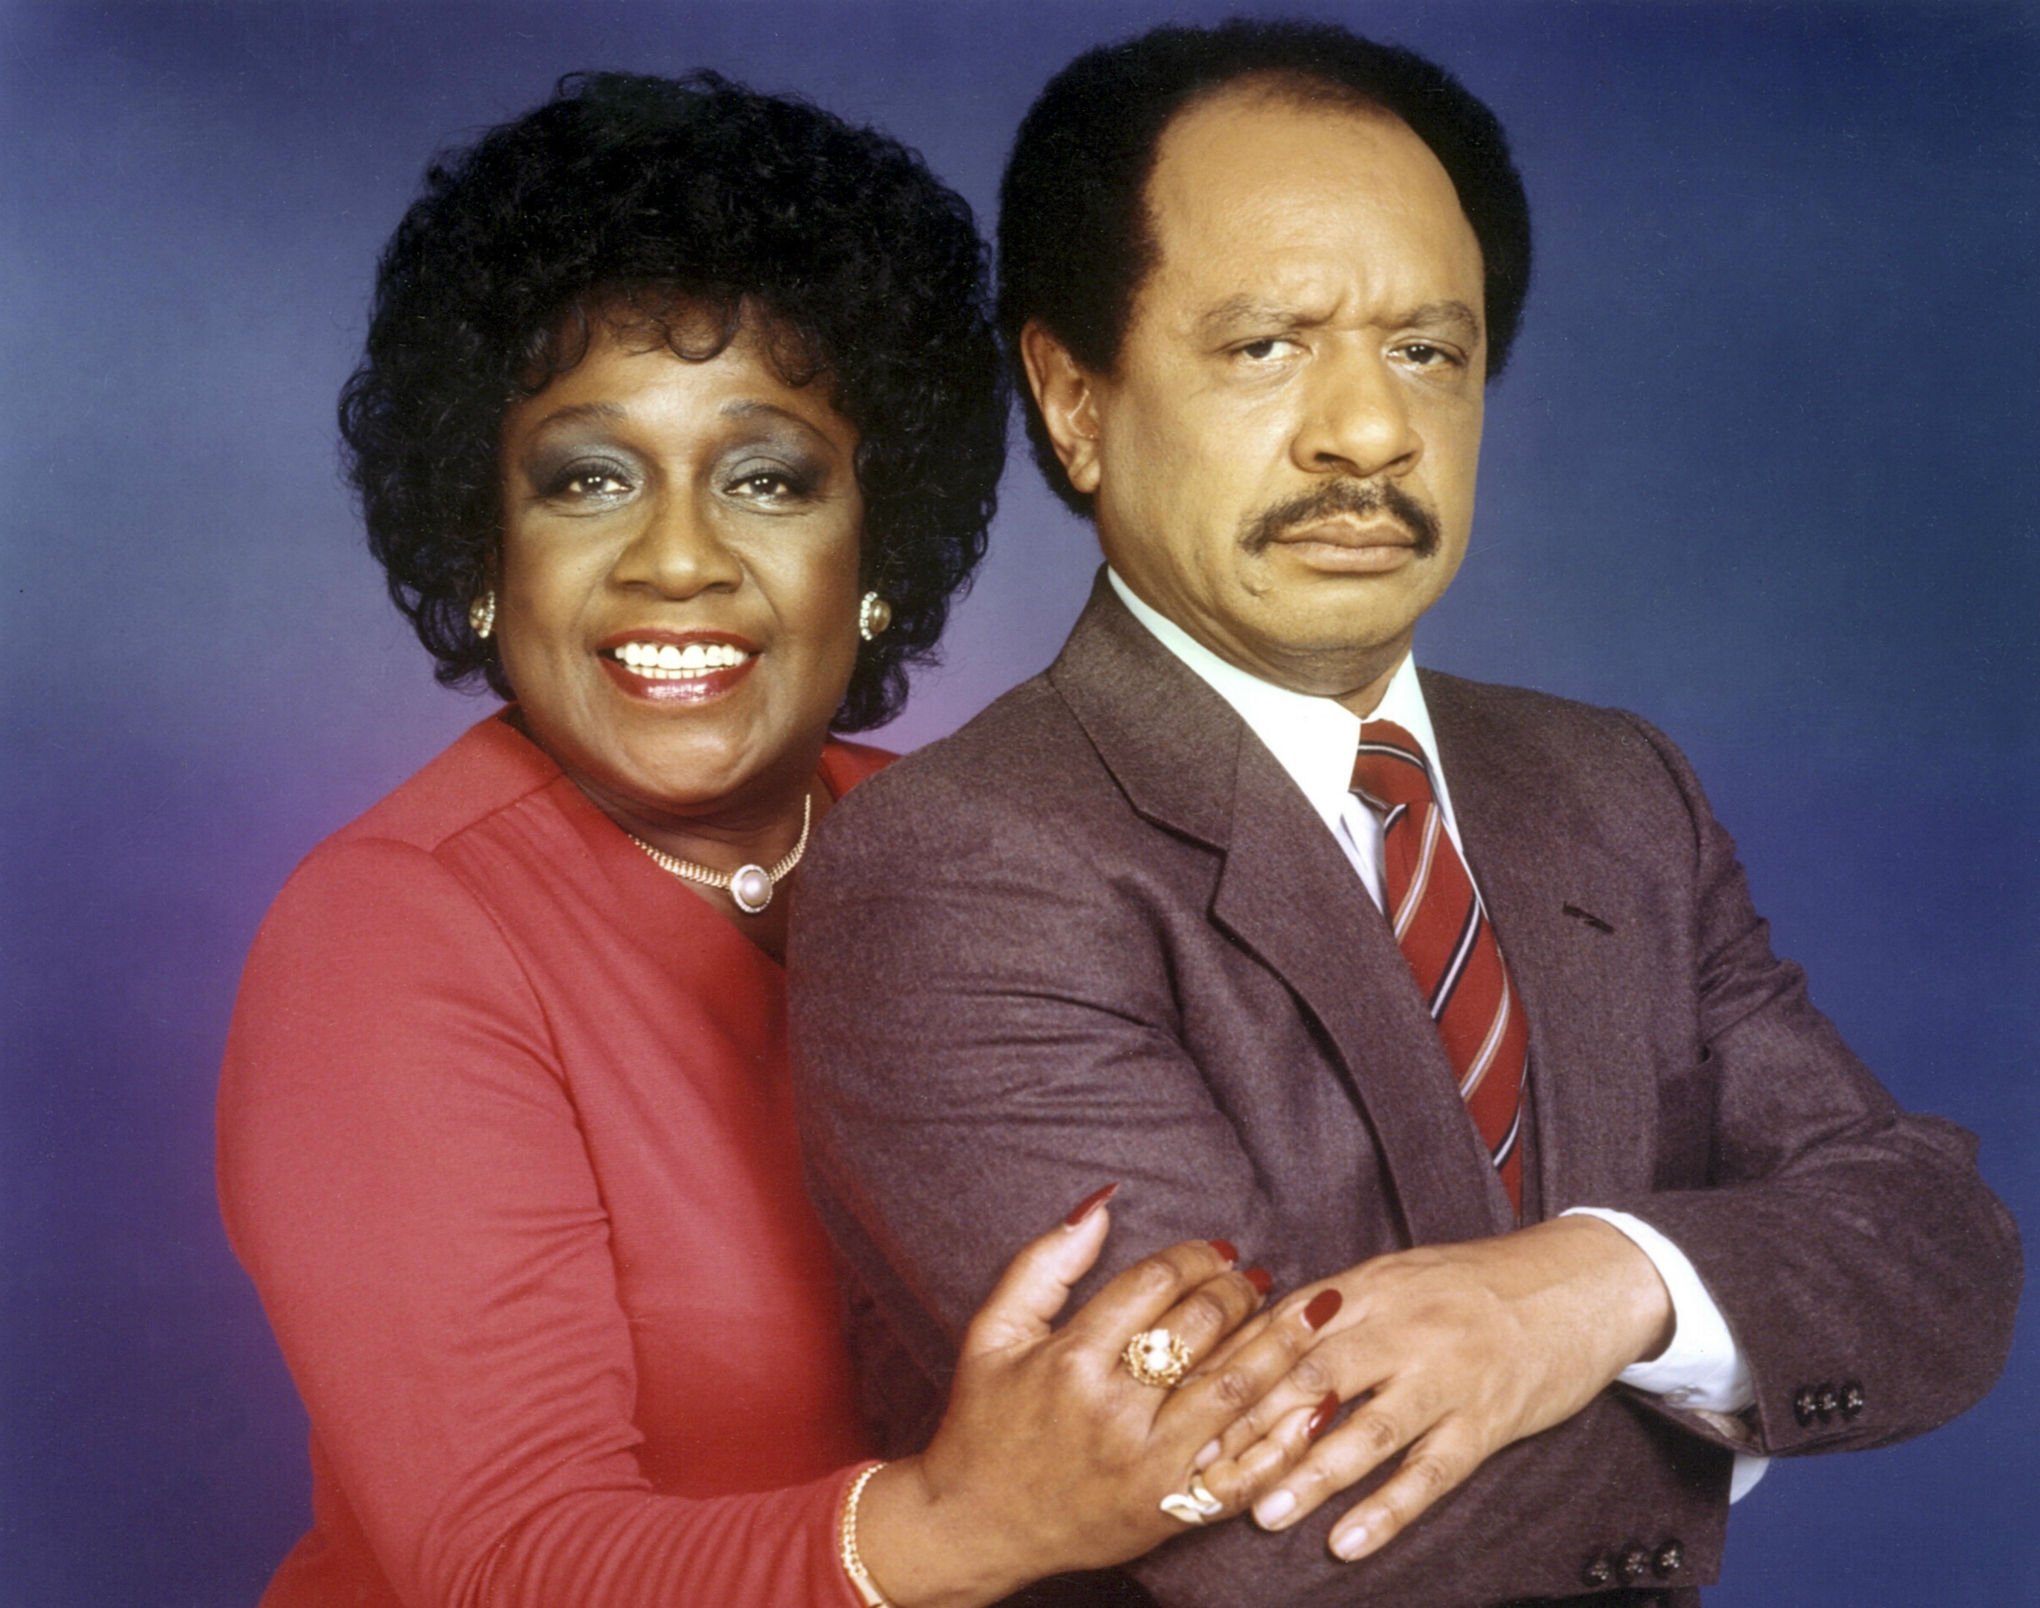 the, Jeffersons, Comedy, Sitcom, Series, Television,  14 Wallpaper